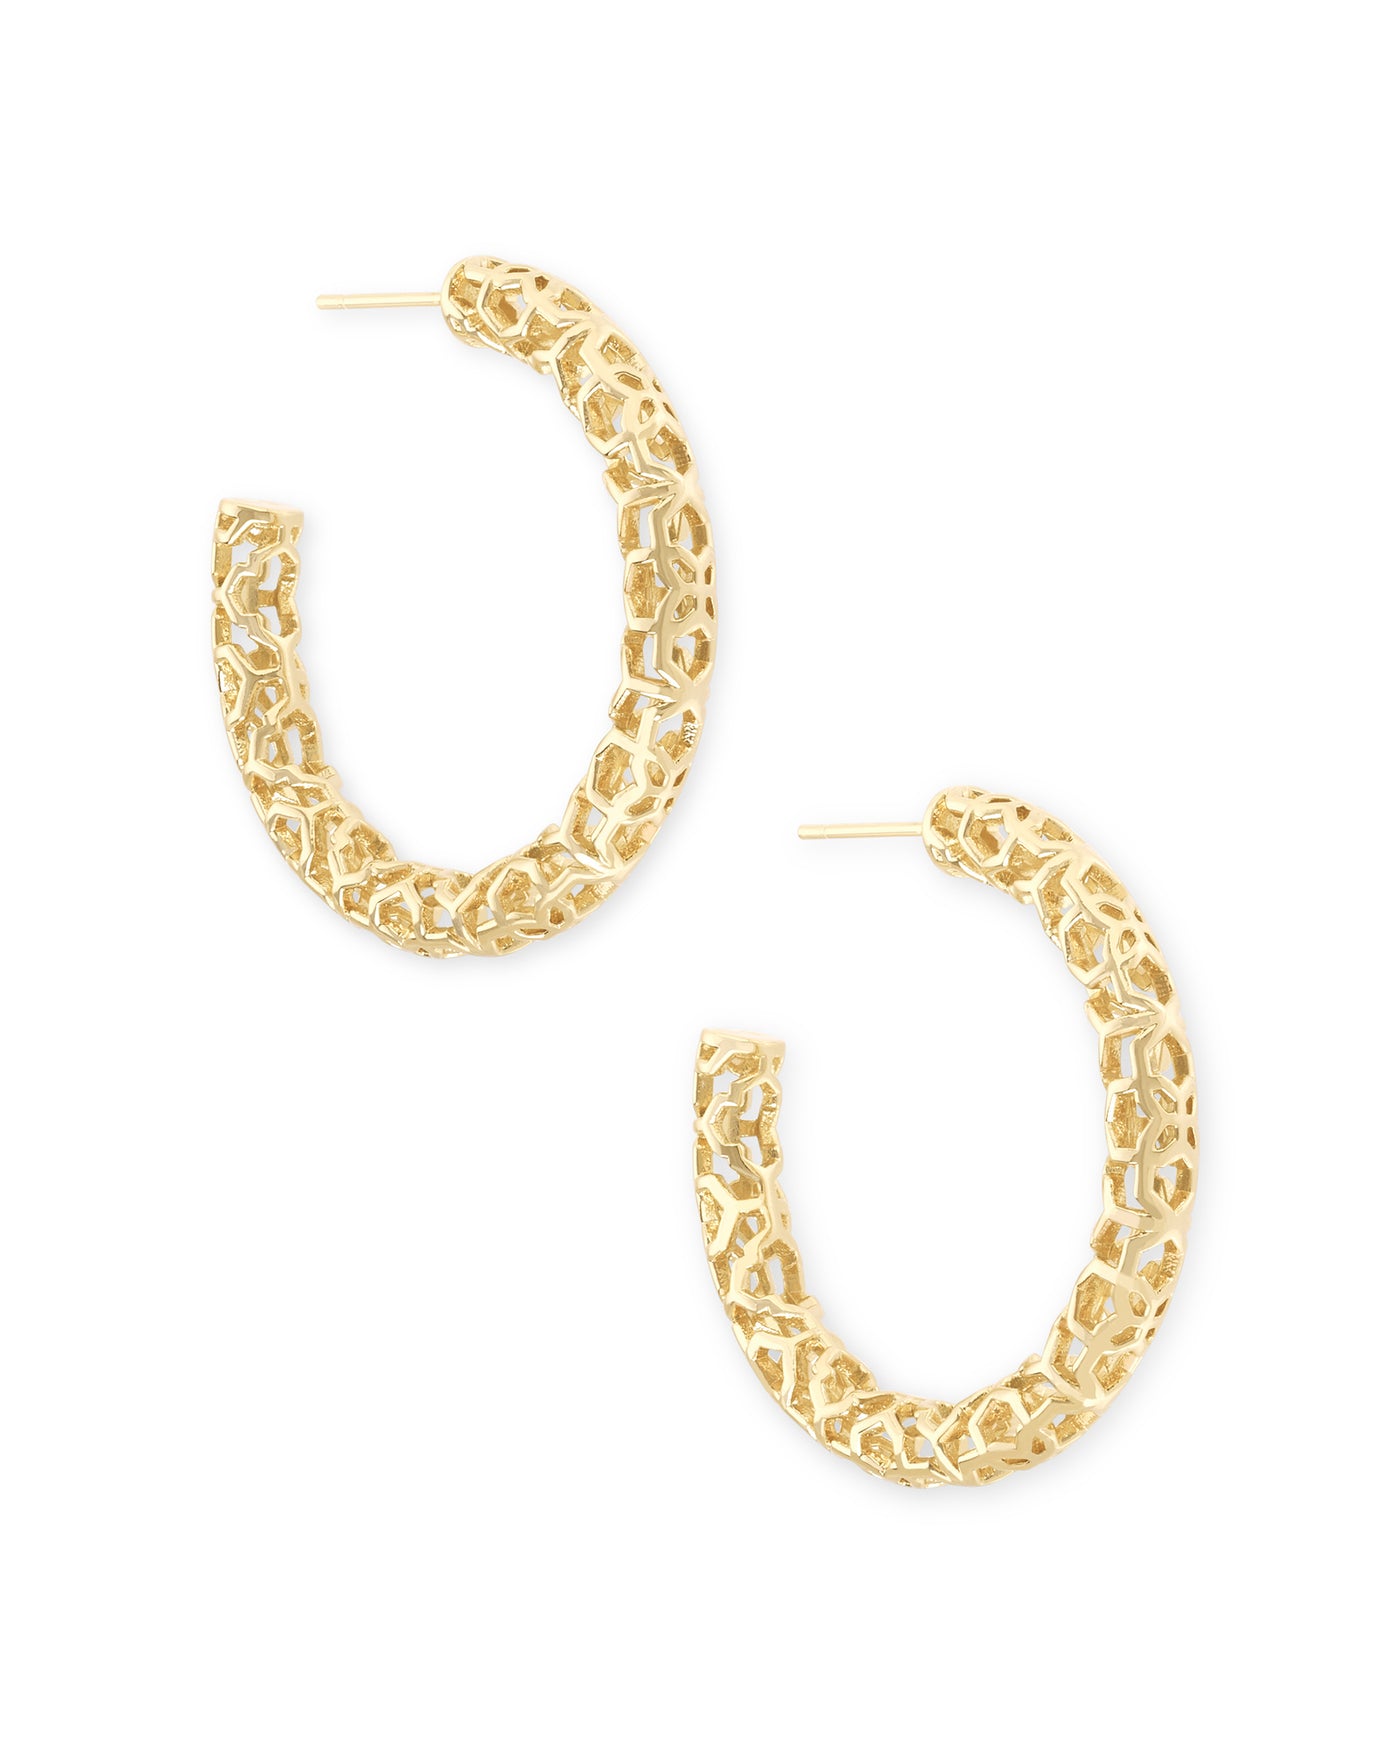 Kendra Scott Maggie 1.5' Hoop Earrings Gold Filigree-Earrings-Kendra Scott-Market Street Nest, Fashionable Clothing, Shoes and Home Décor Located in Mabank, TX